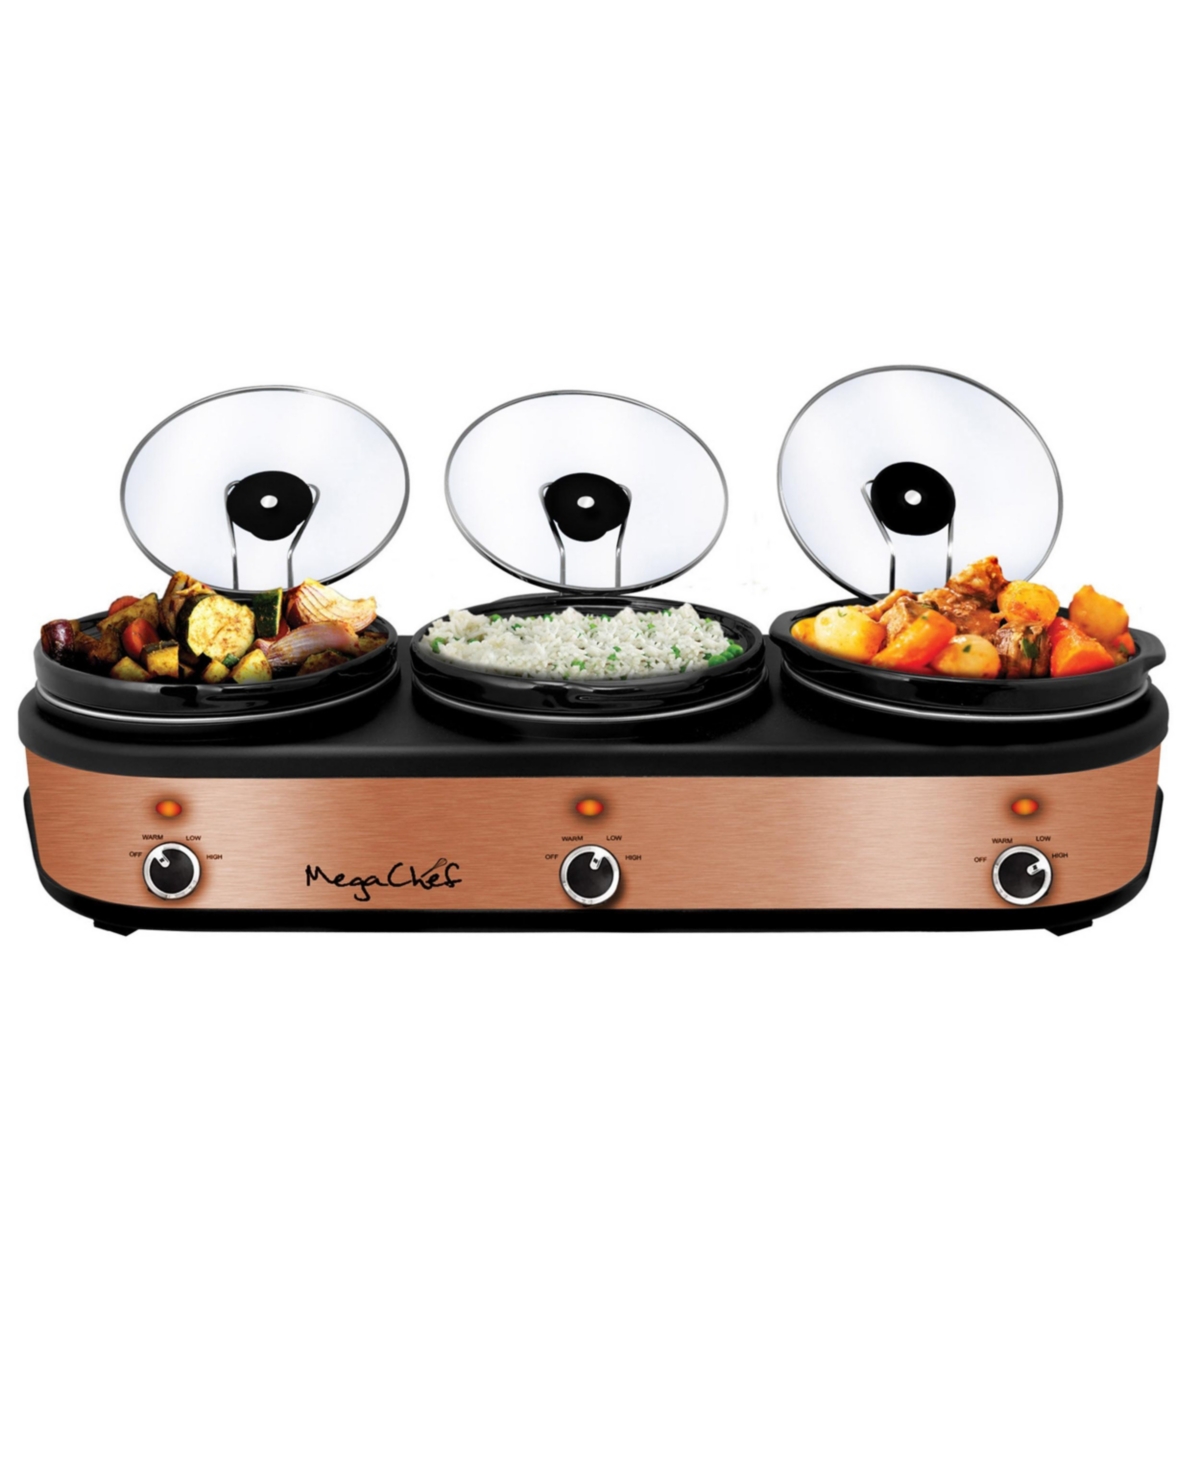 Triple 2.5 Quart Slow Cooker and Buffet Server in Brushed Copper and Black Finish with 3 Ceramic Cooking Pots and Removable Lid Rests - Rust/